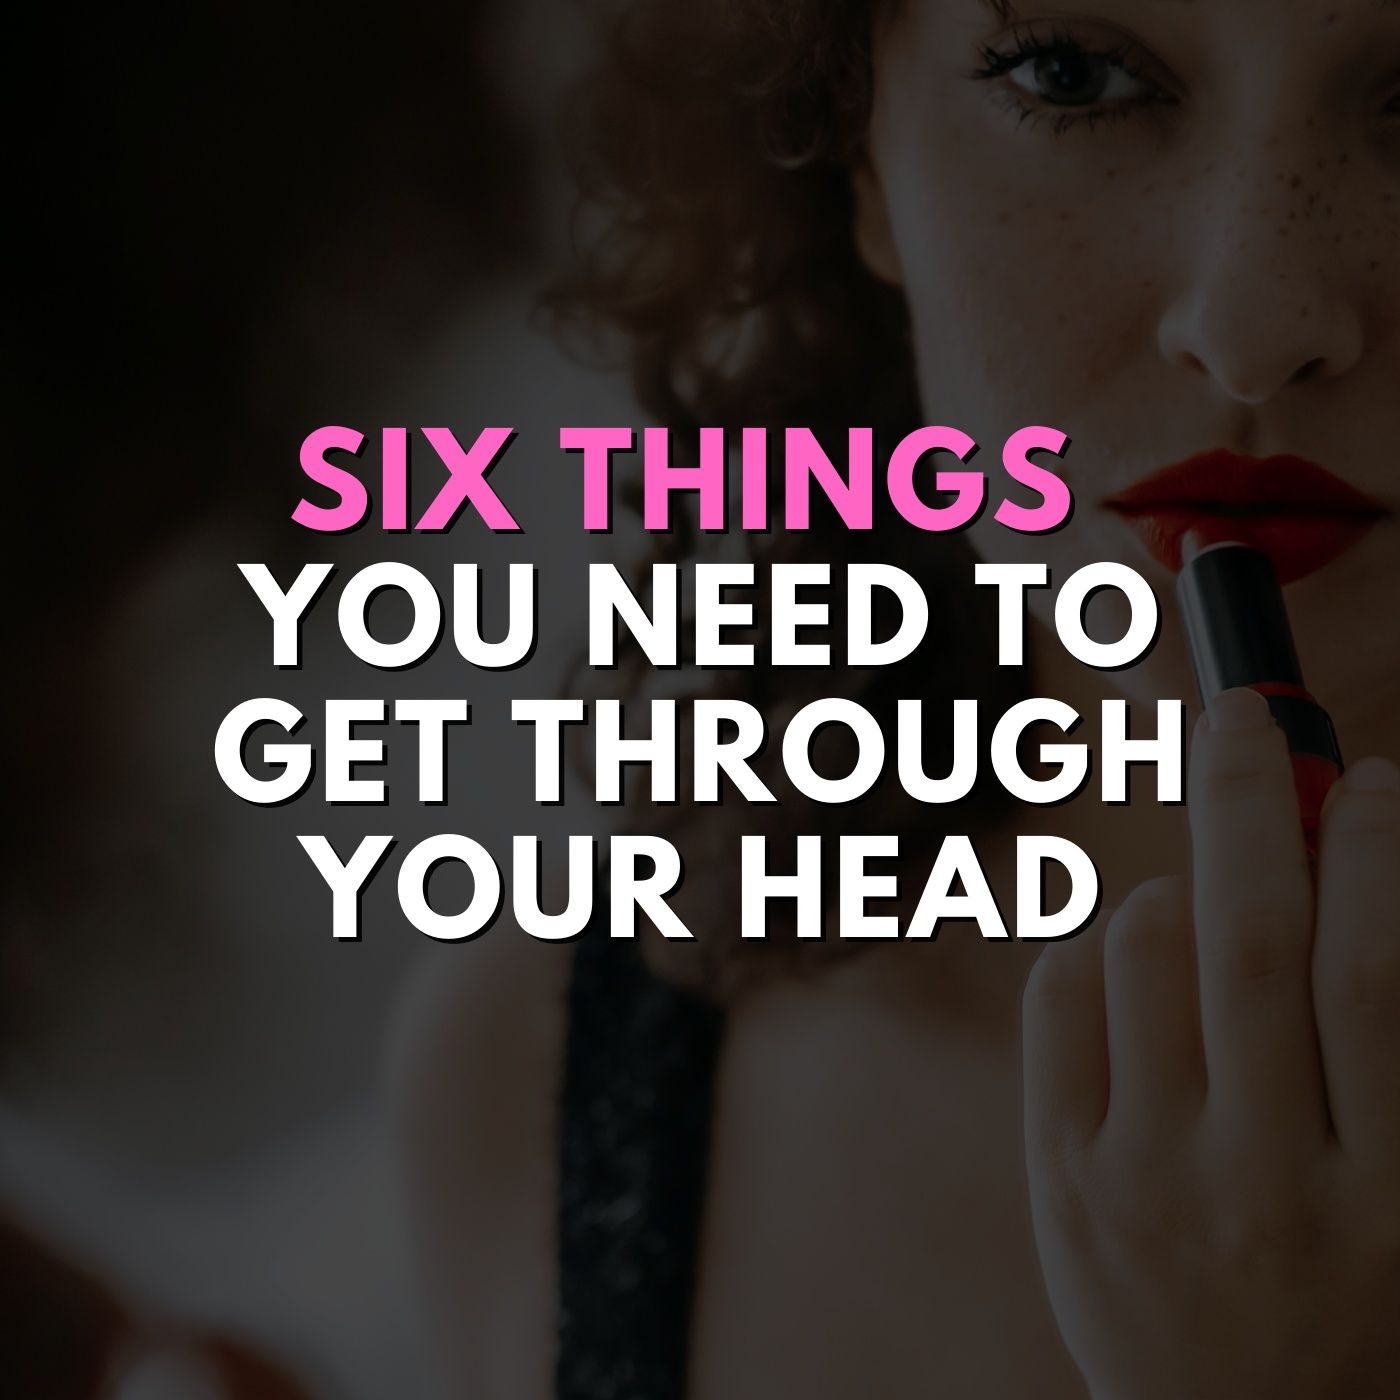 Six Things You Need to Get Through Your Head